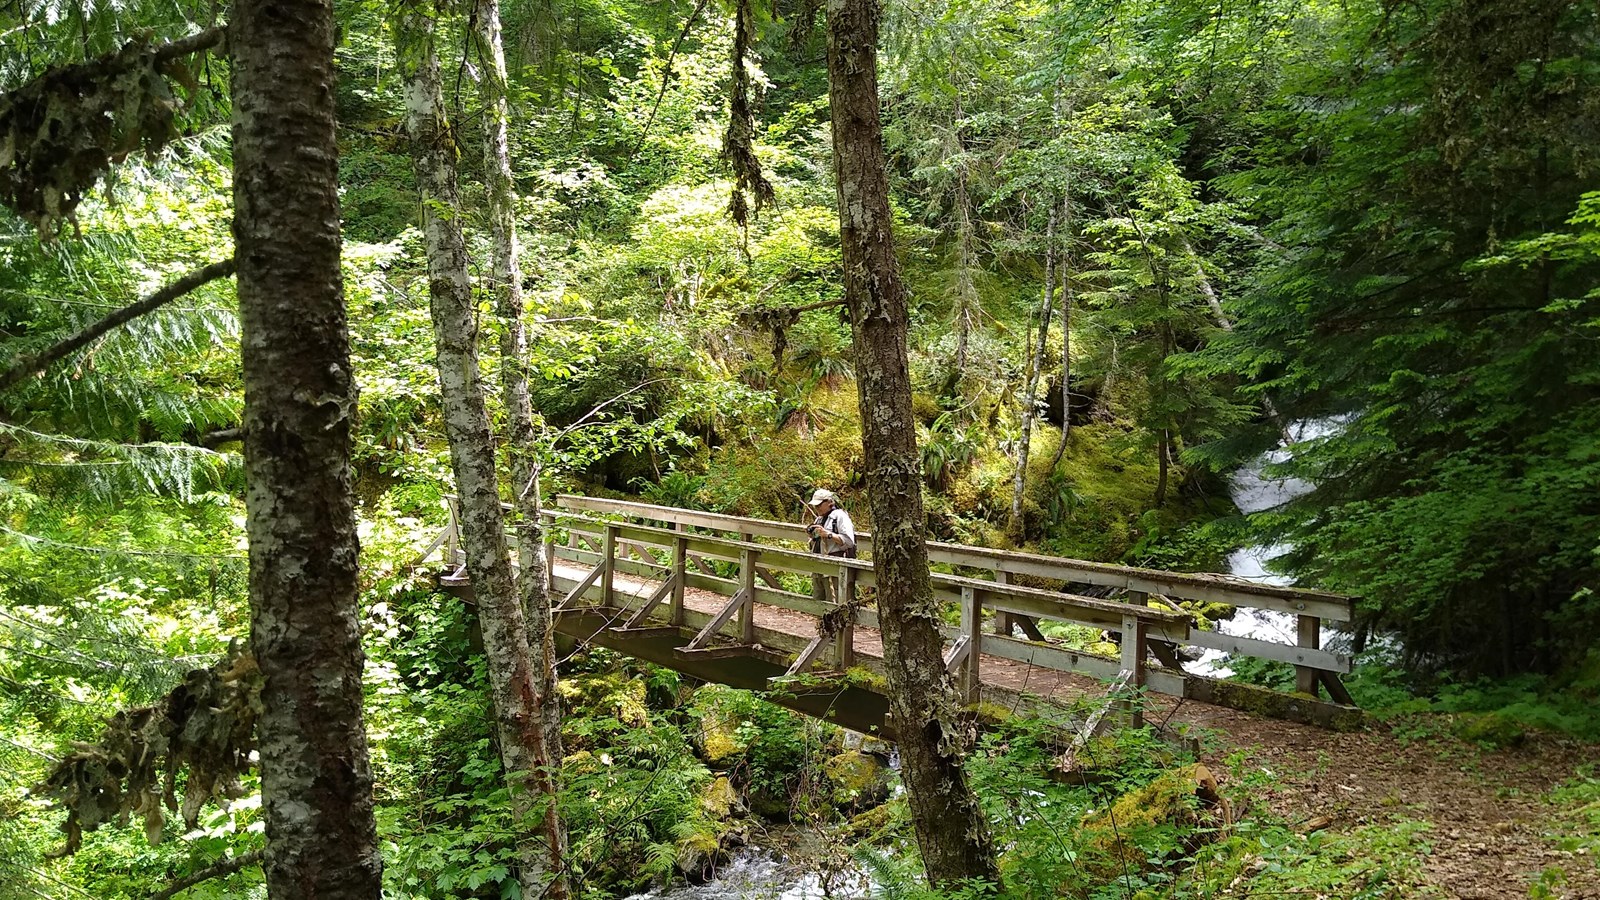 A hiker stands on a footbridge over a creek in a thick, green forest.